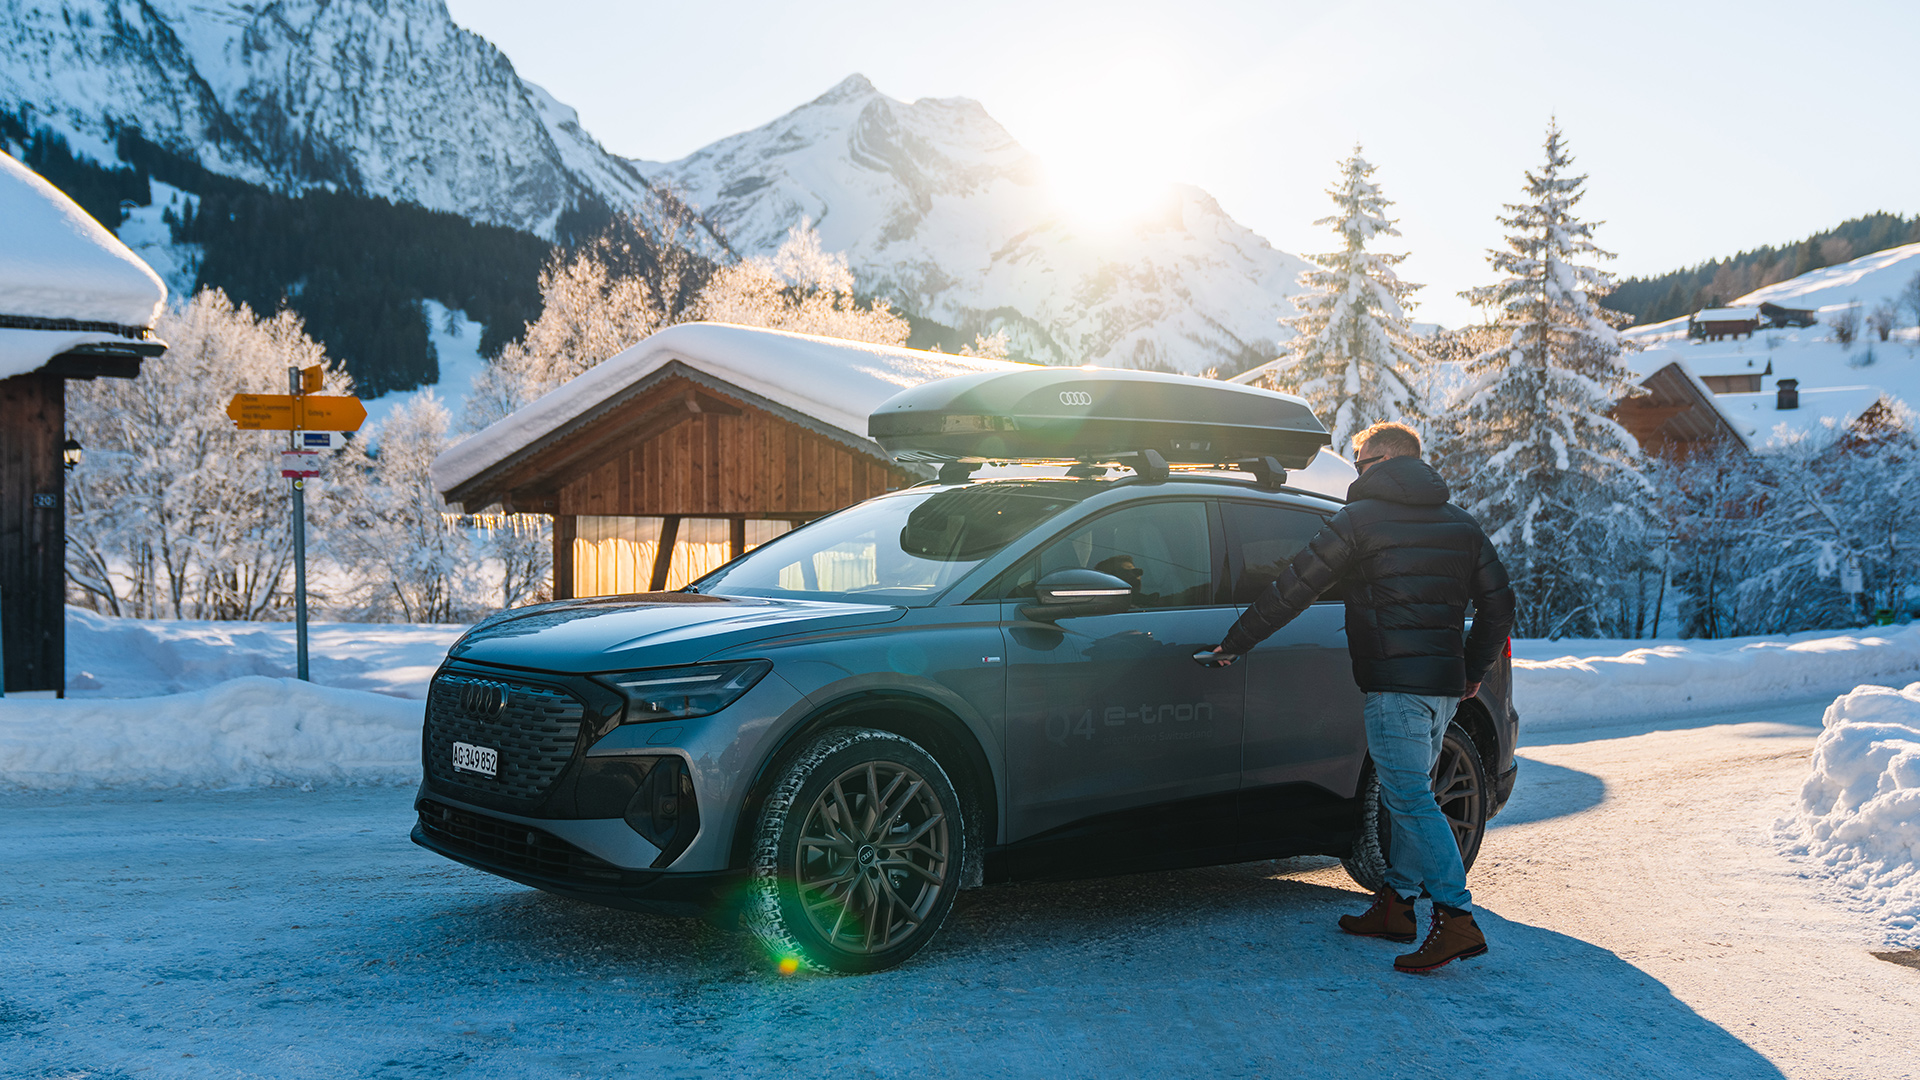 Silver Audi Q8 e-tron with luggage box stands in front of a wooden hut in the snow in the Alps, man wants to get into the car and open the driver's door